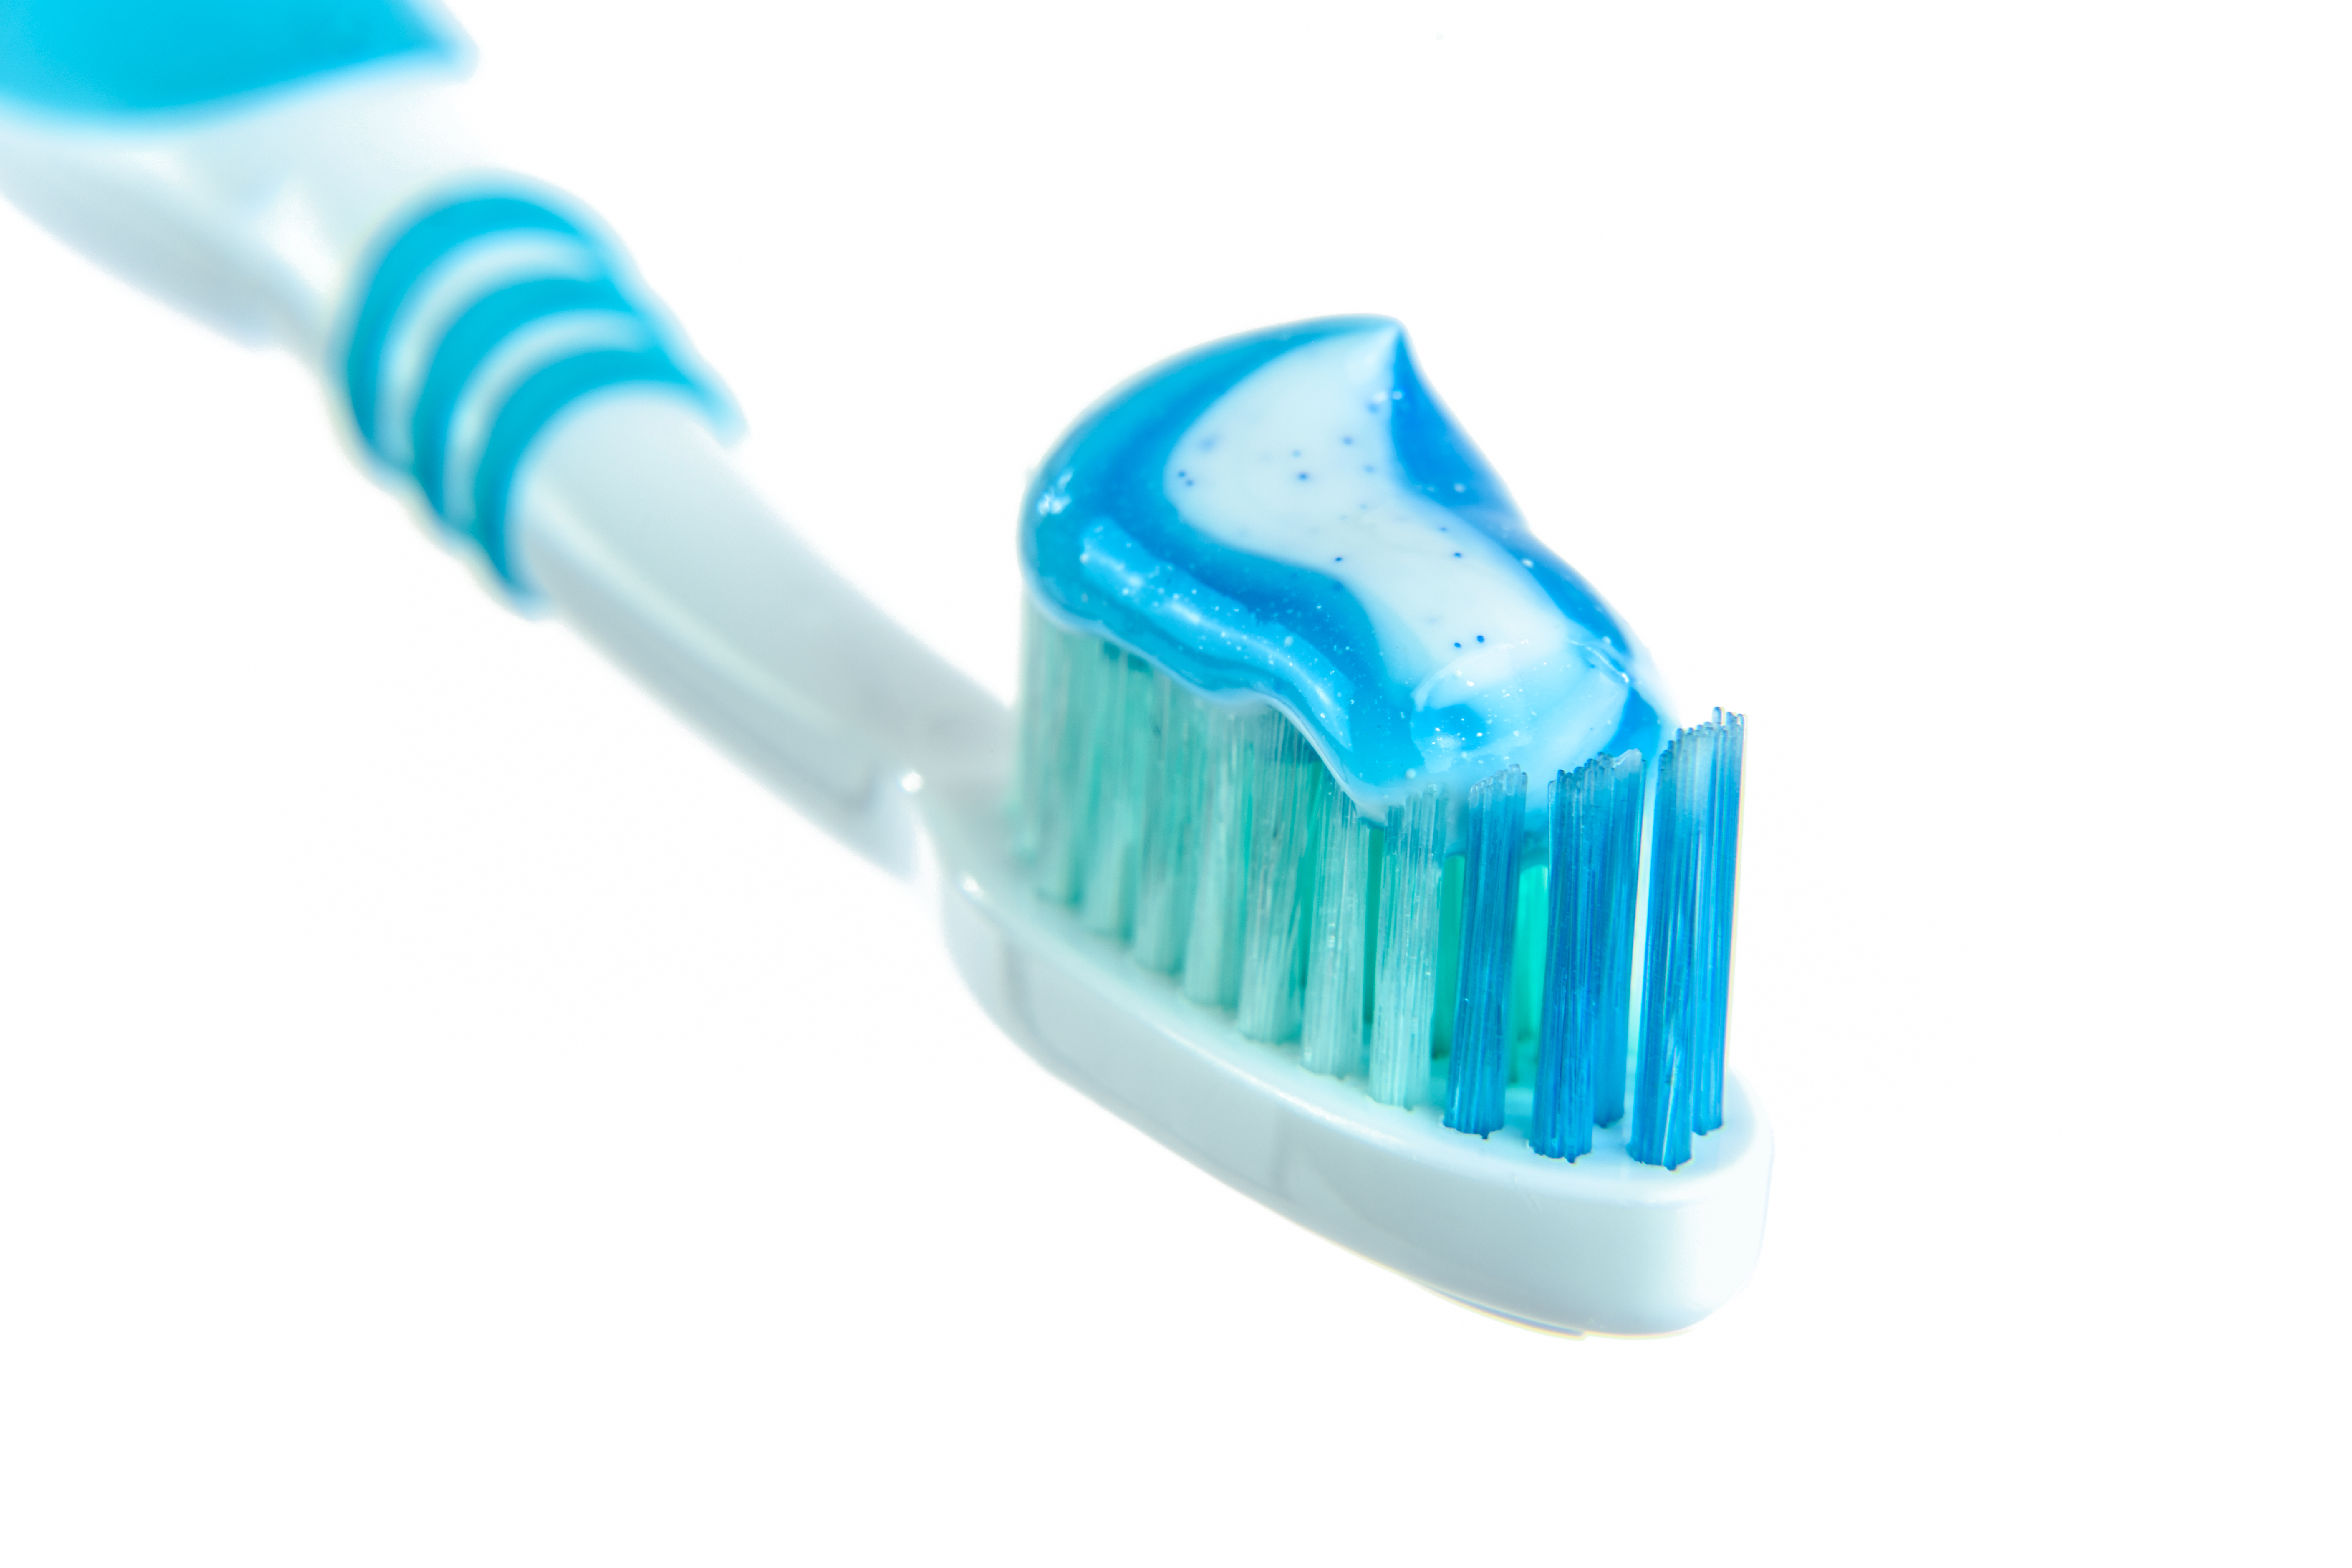 Toothbrush with toothpaste on bristles